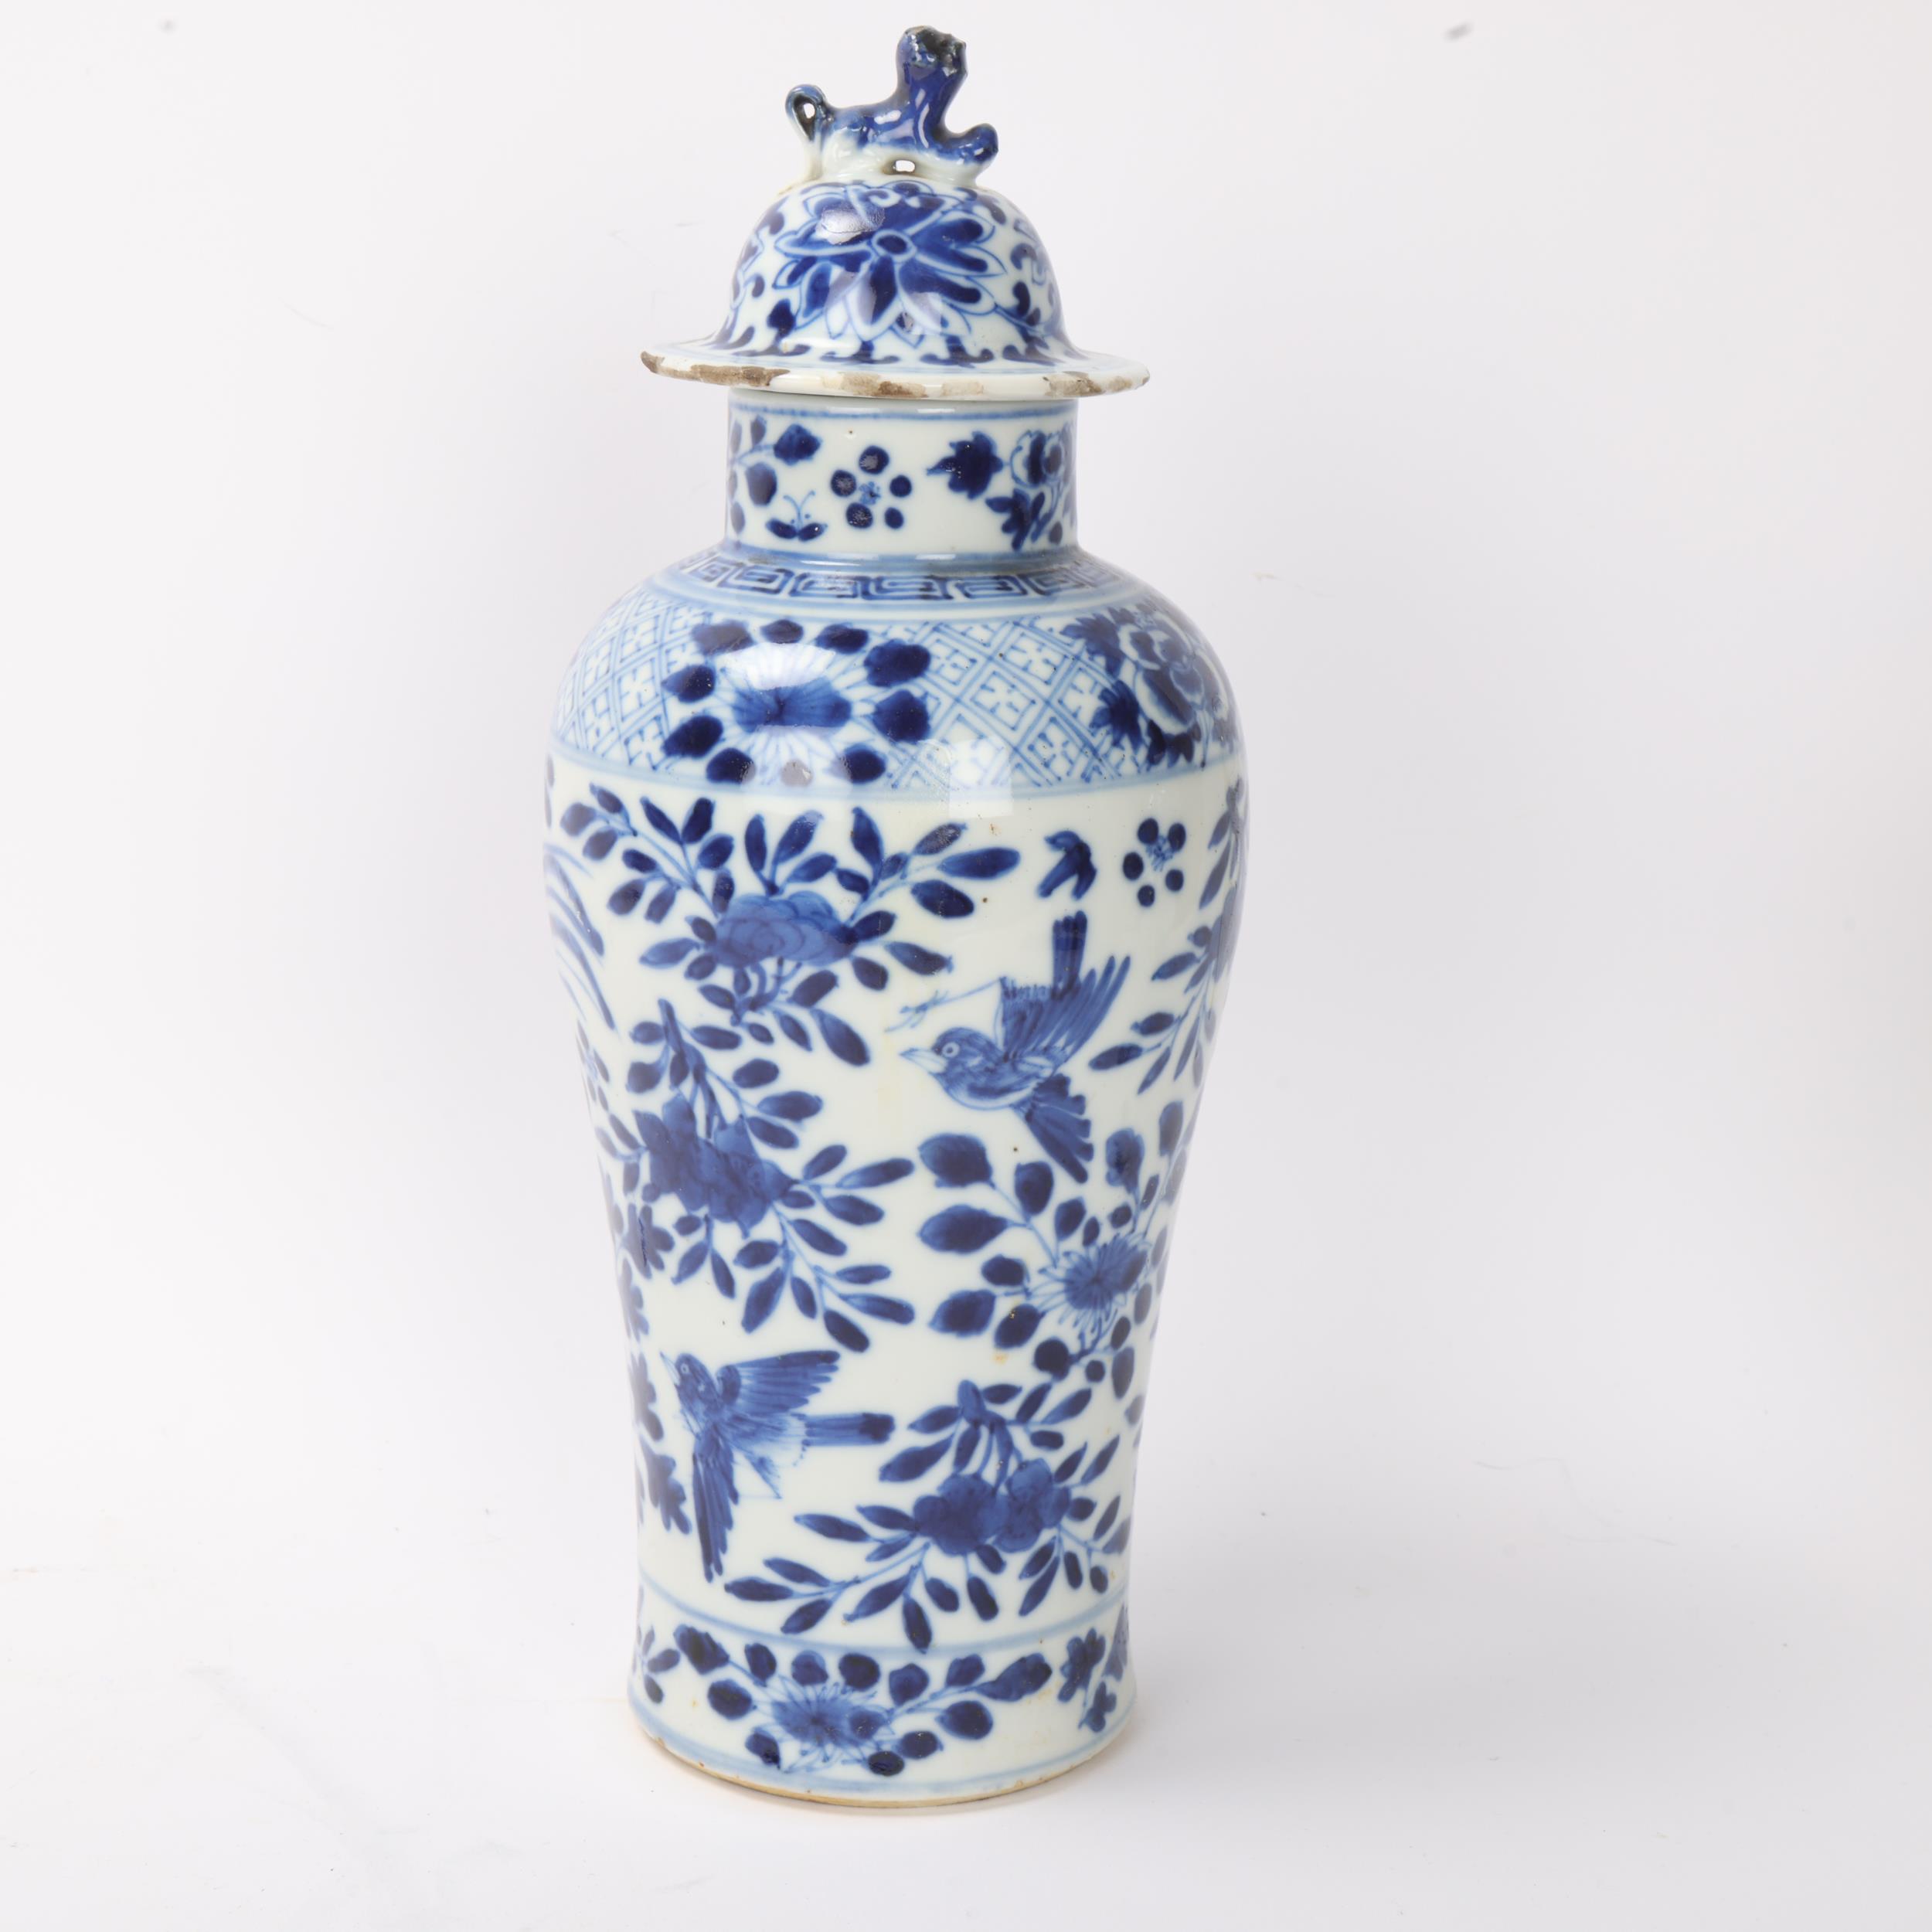 Chinese blue and white porcelain jar and cover, Kangxi mark, dog of fo knop, 4 character mark, - Image 3 of 3